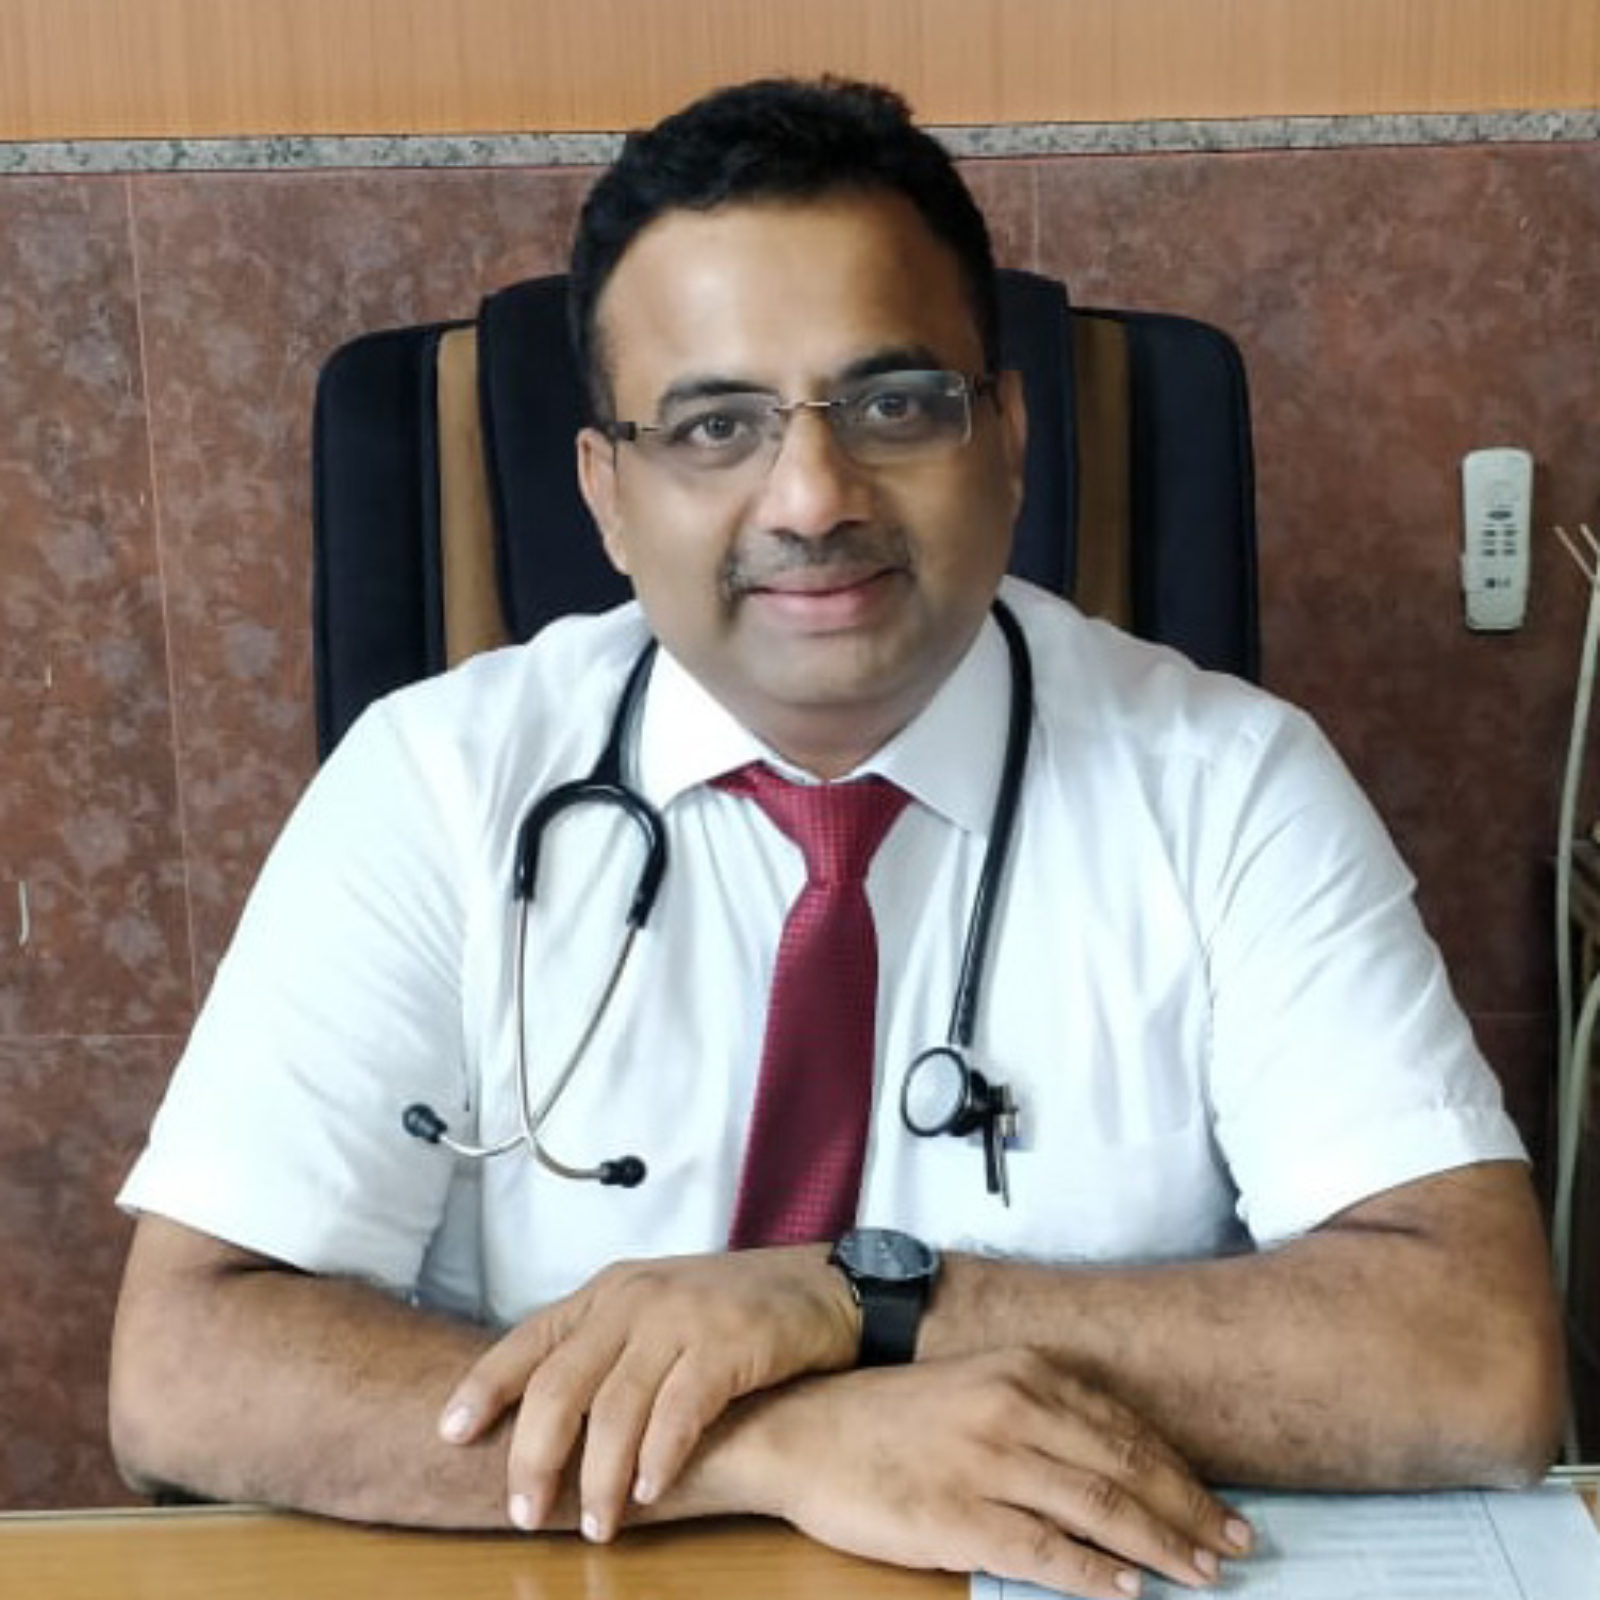 Dr. Anand Sude